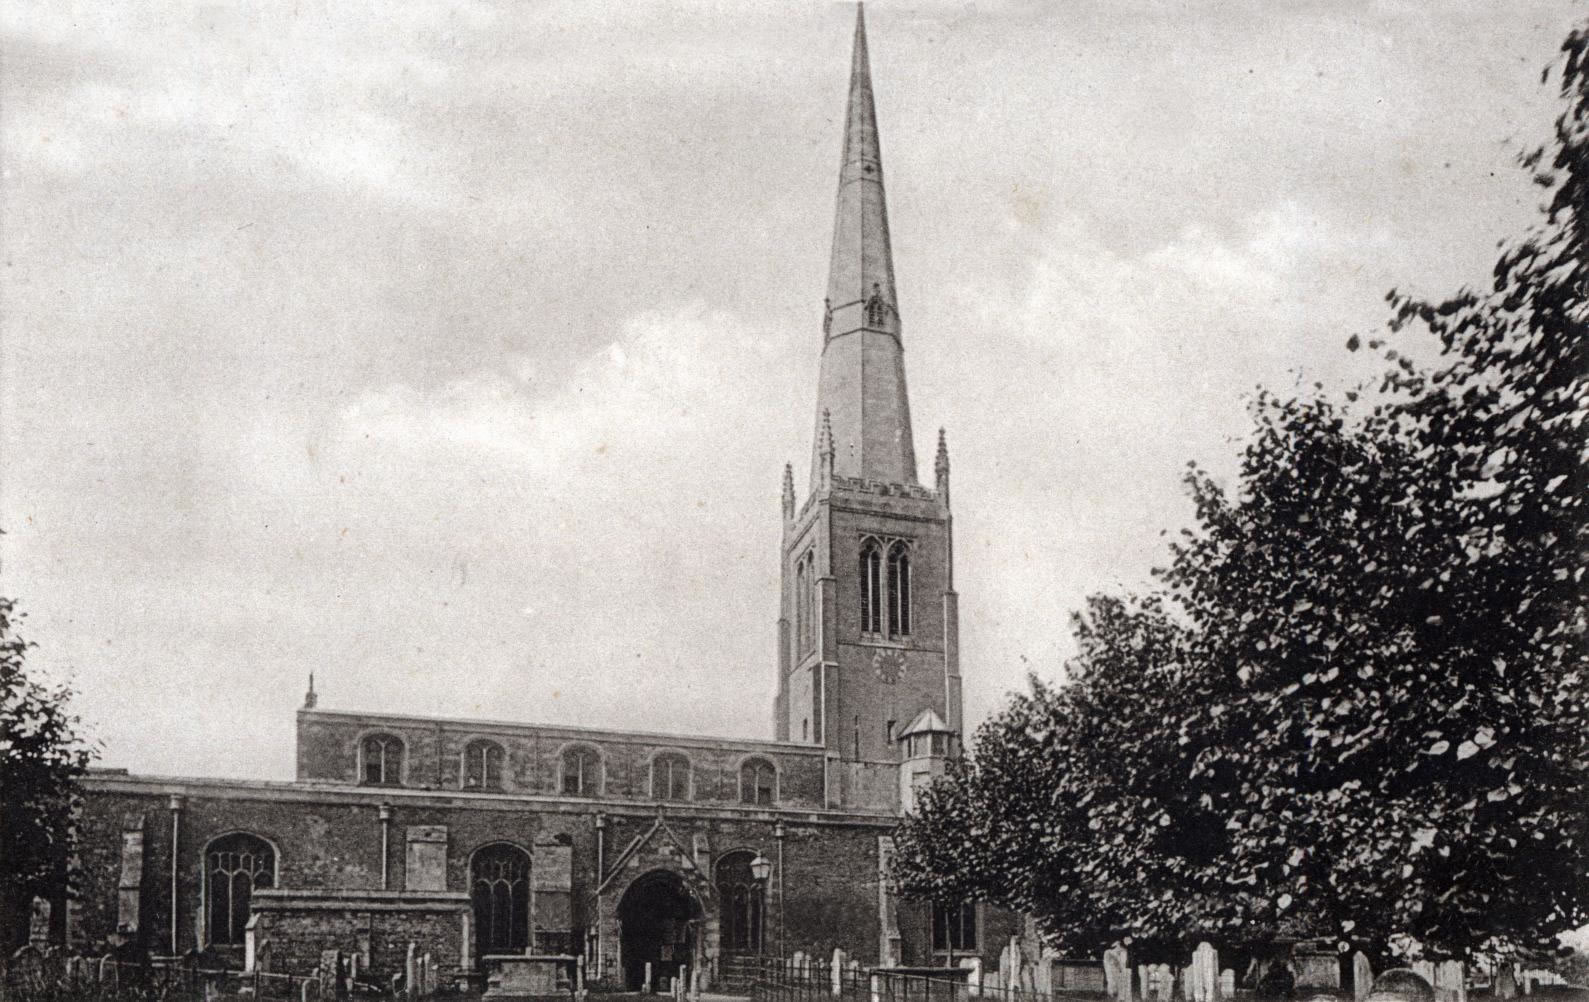 All Saints Church, St Ives, Cambridgeshire from TheGenealogist's Image Archive